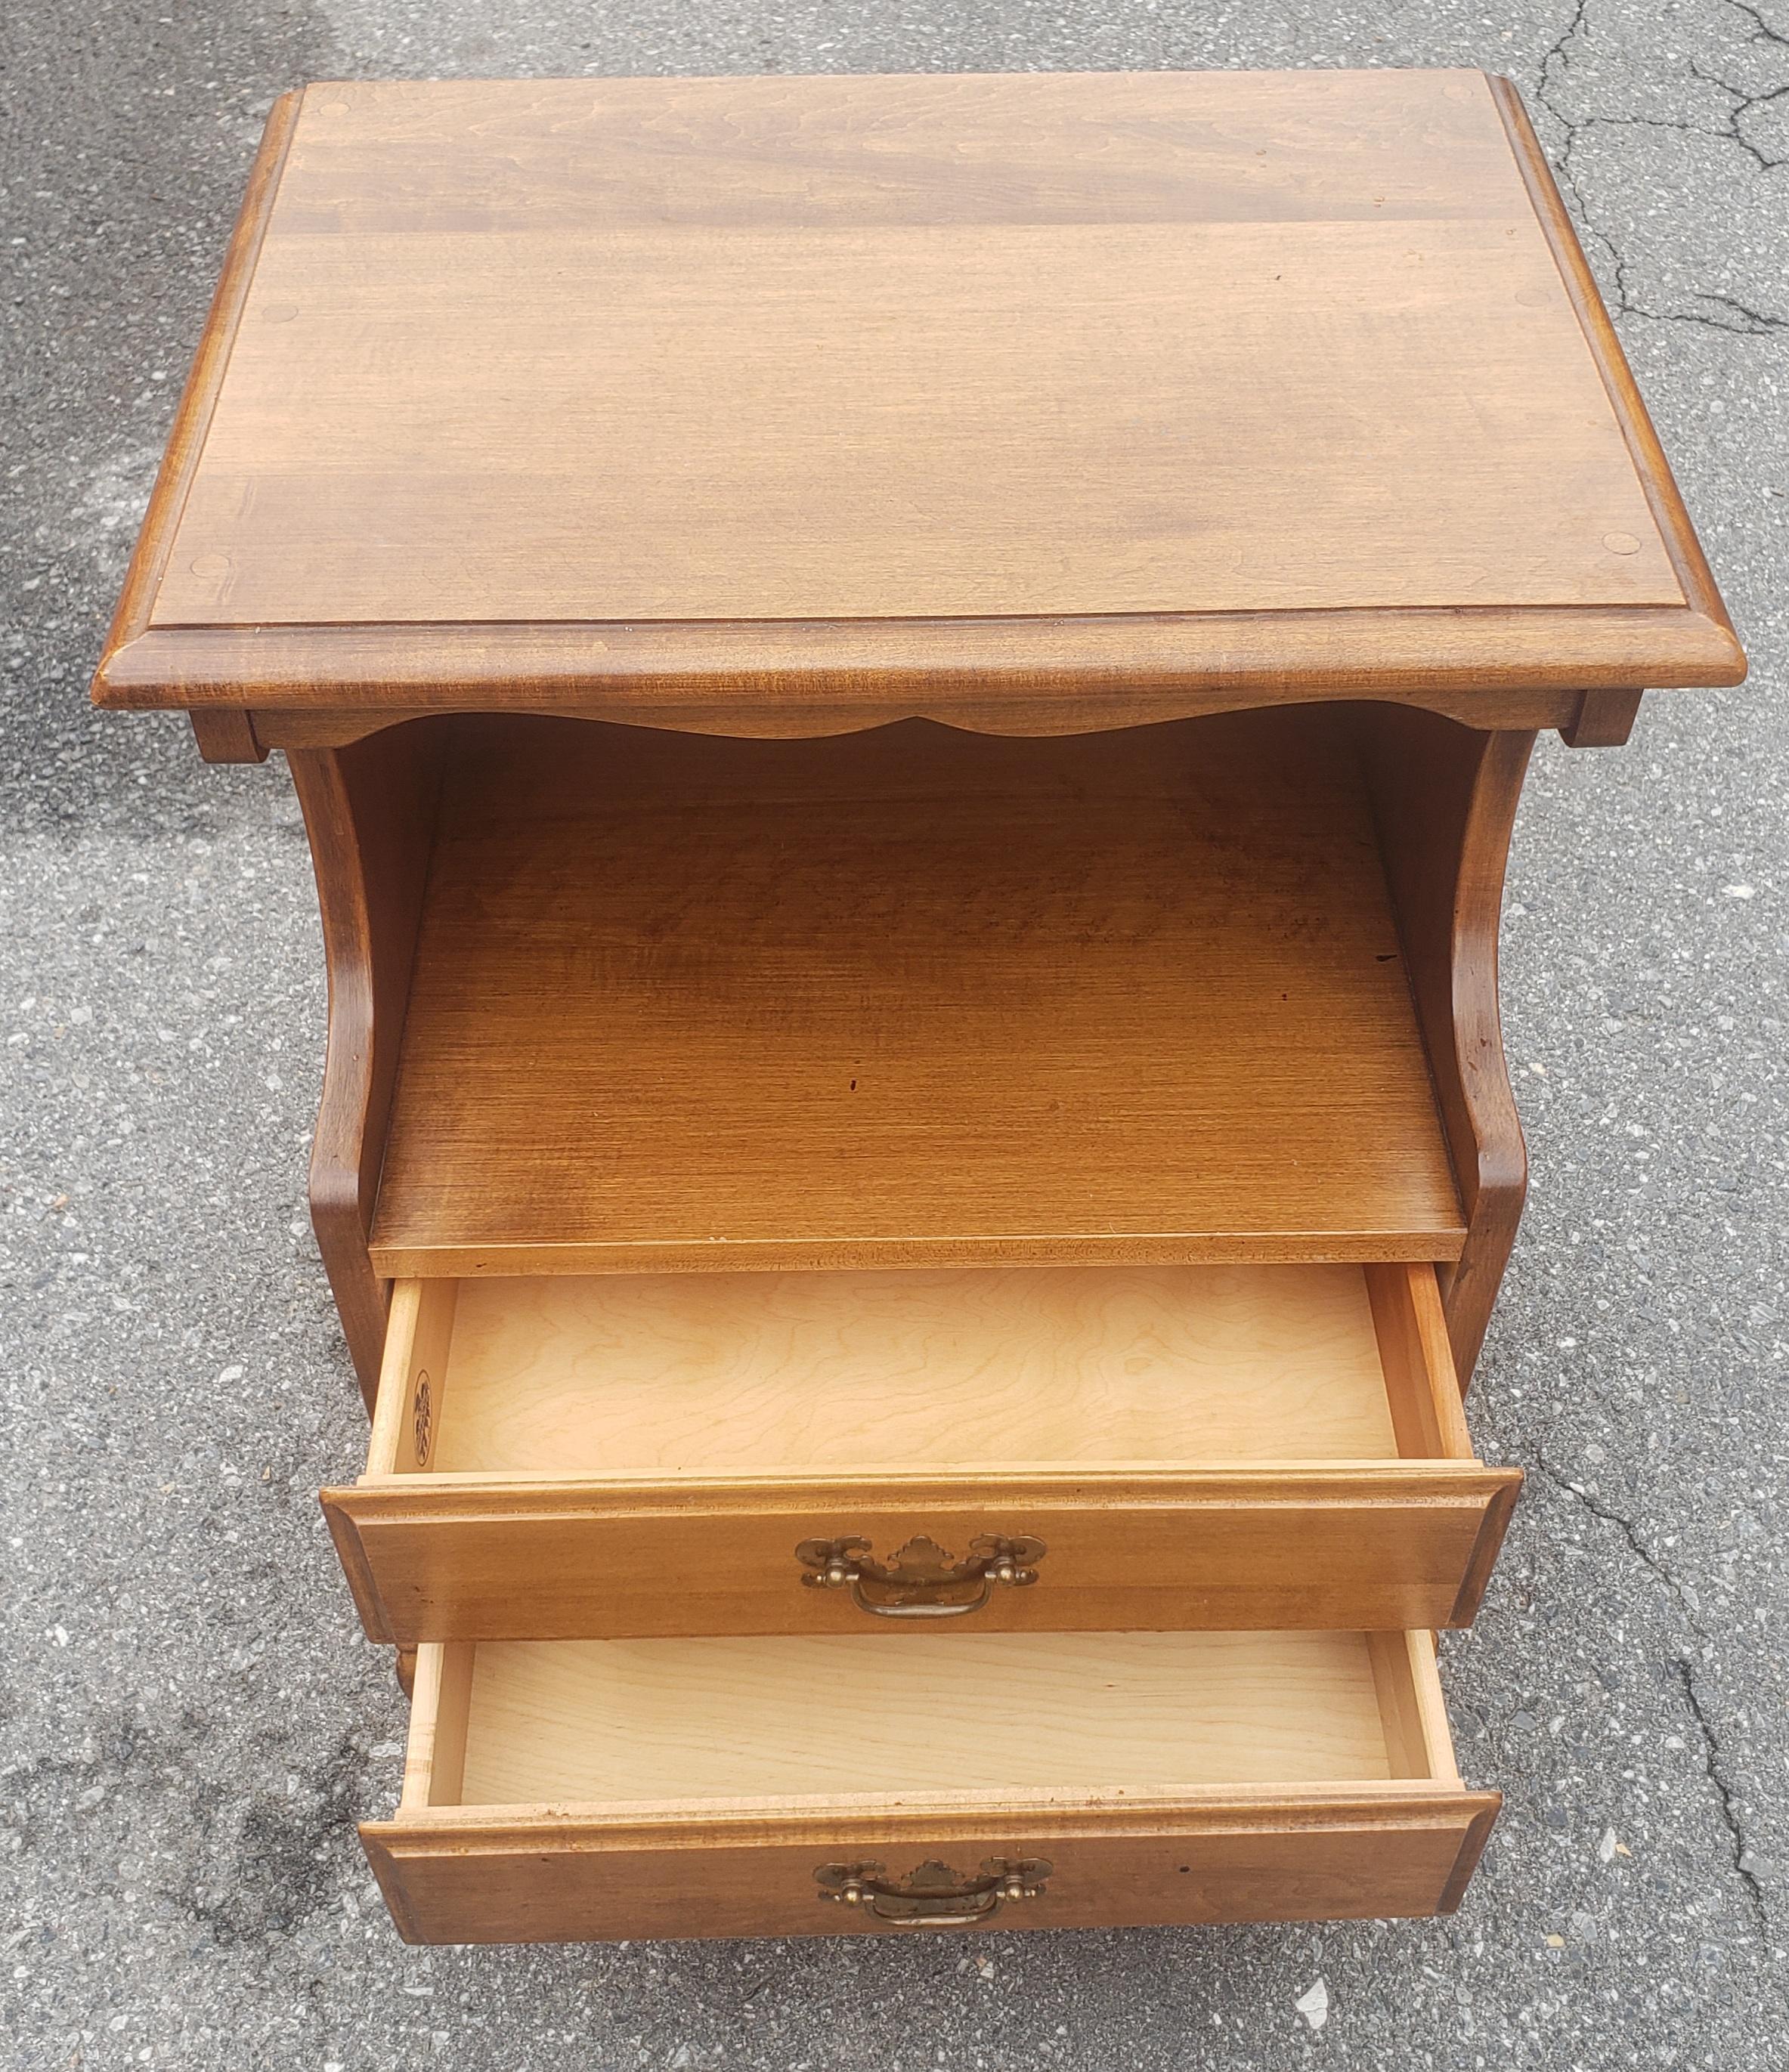 Heywood Wakefield mid Century style Two-Tier Two-Drawer Cinnamon nightstand Bedside Table in great condition. All solid wood with dovetail drawer construction. Measures 19.5